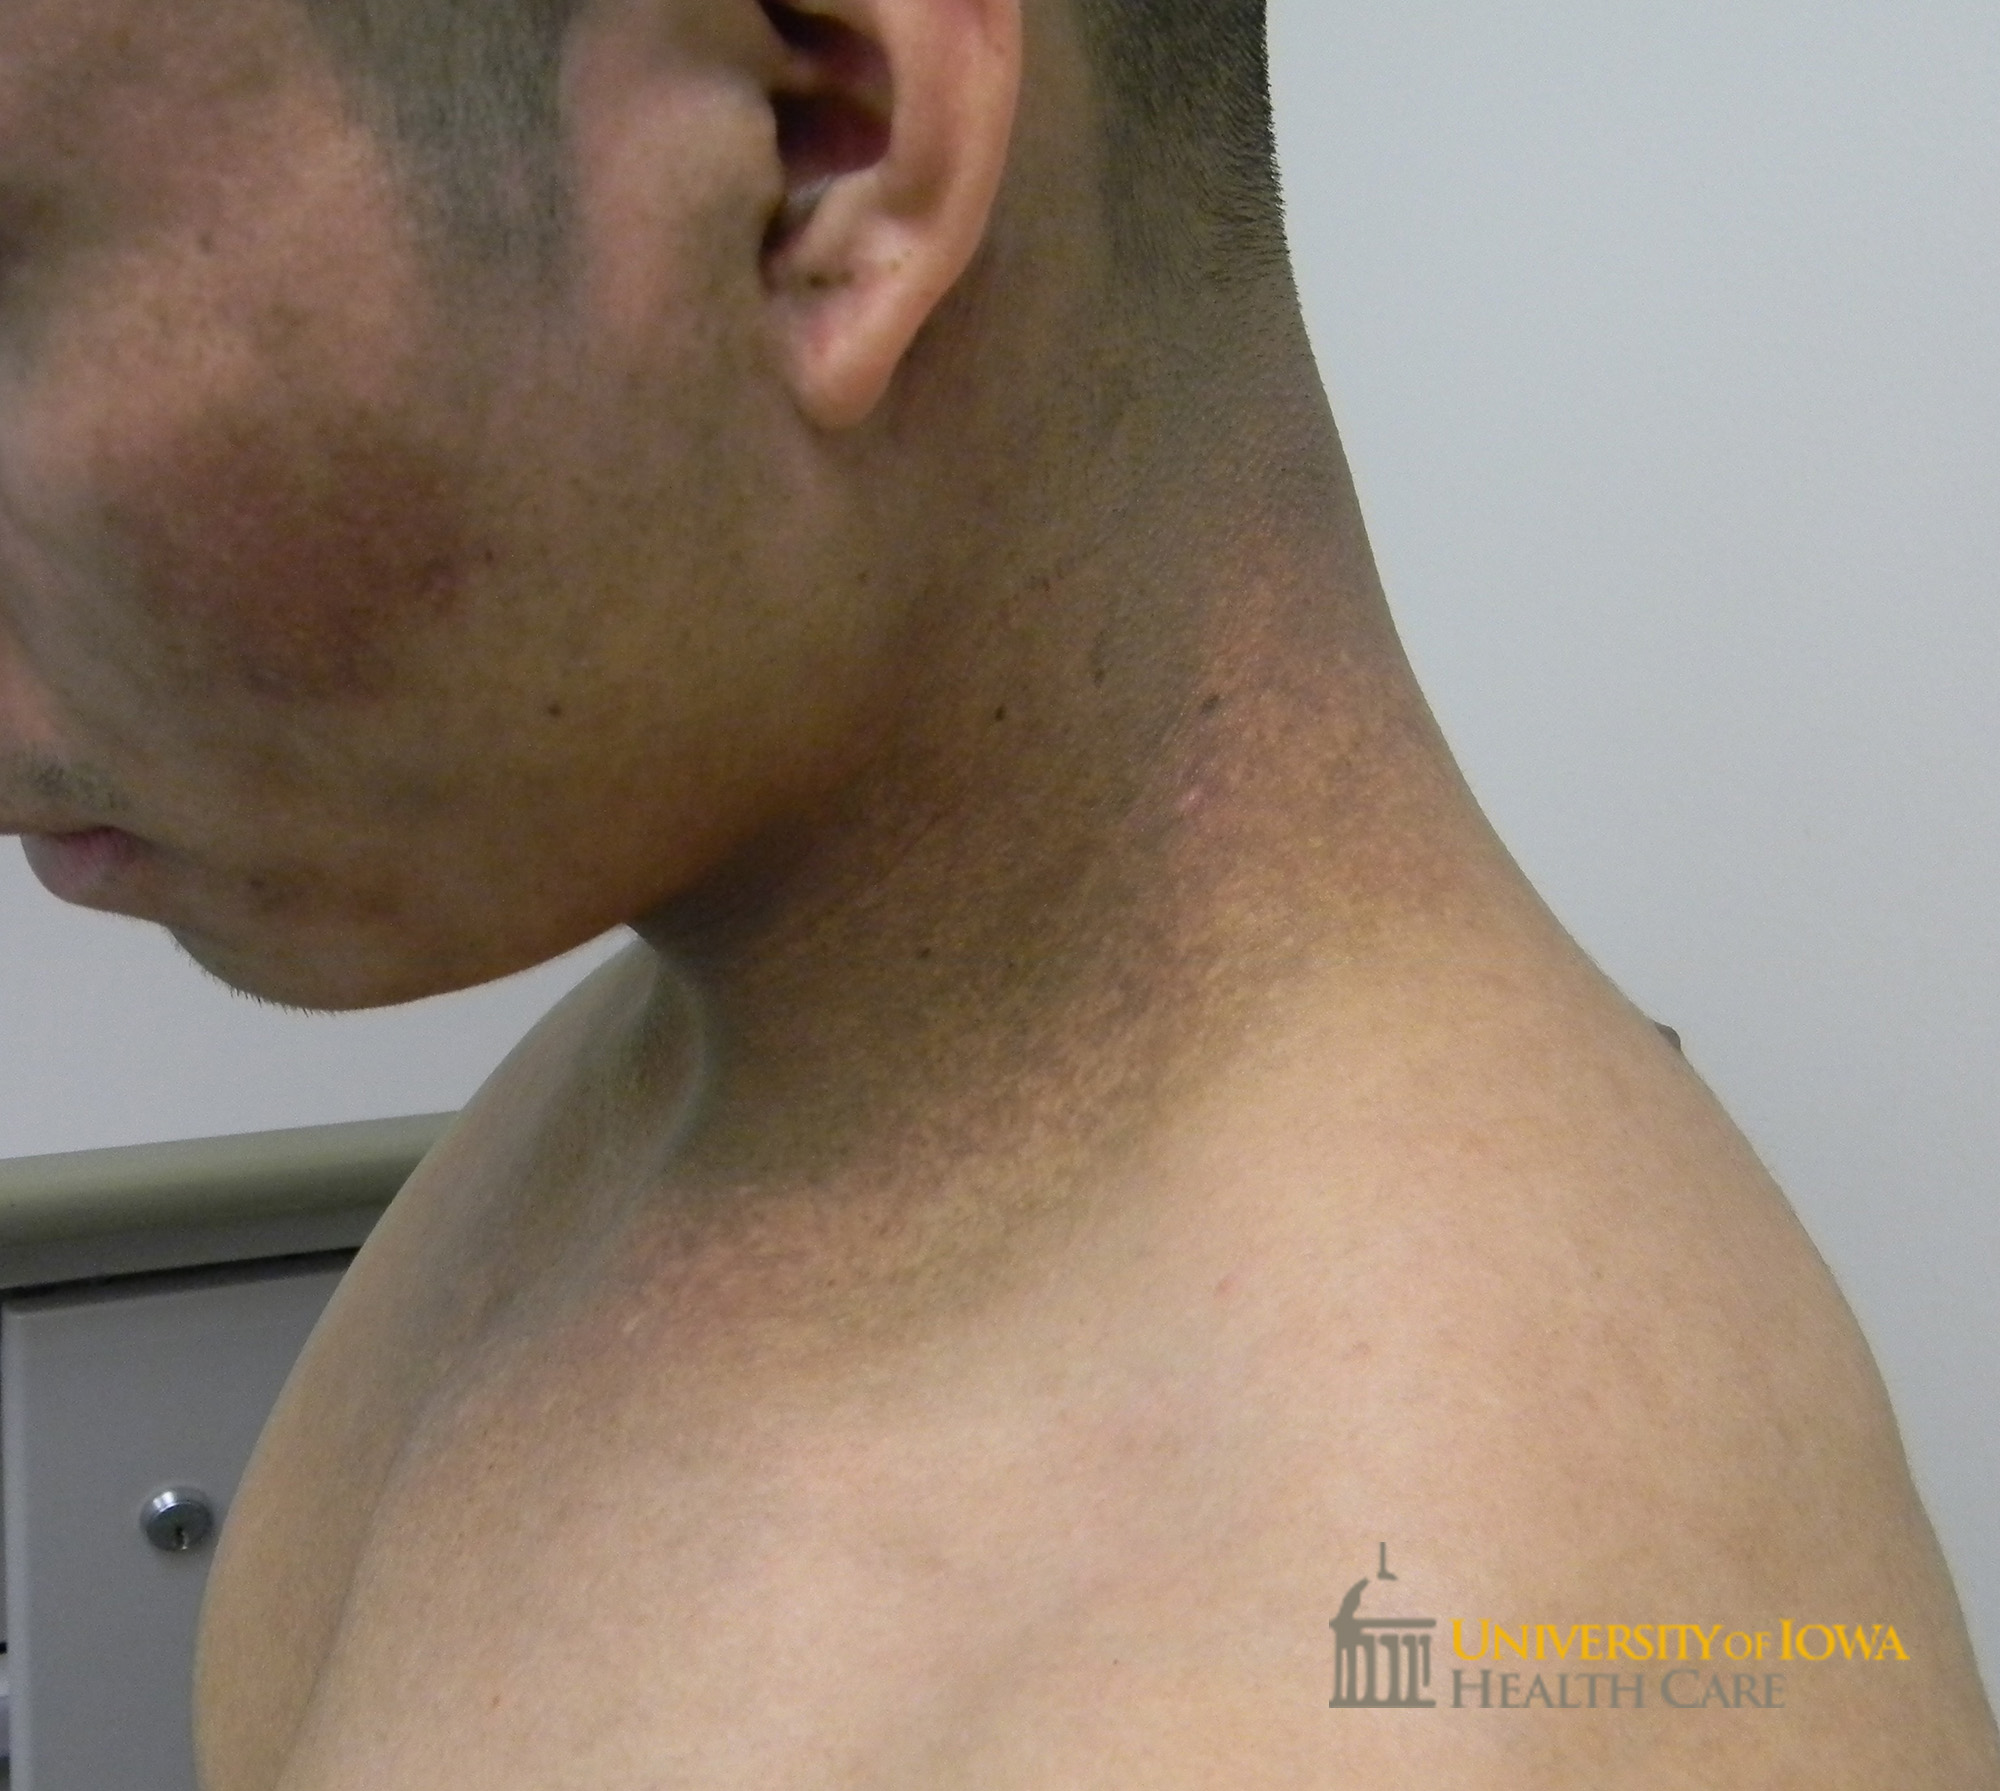 Brown-gray ill-defiend patches on the cheeks and neck. (click images for higher resolution).